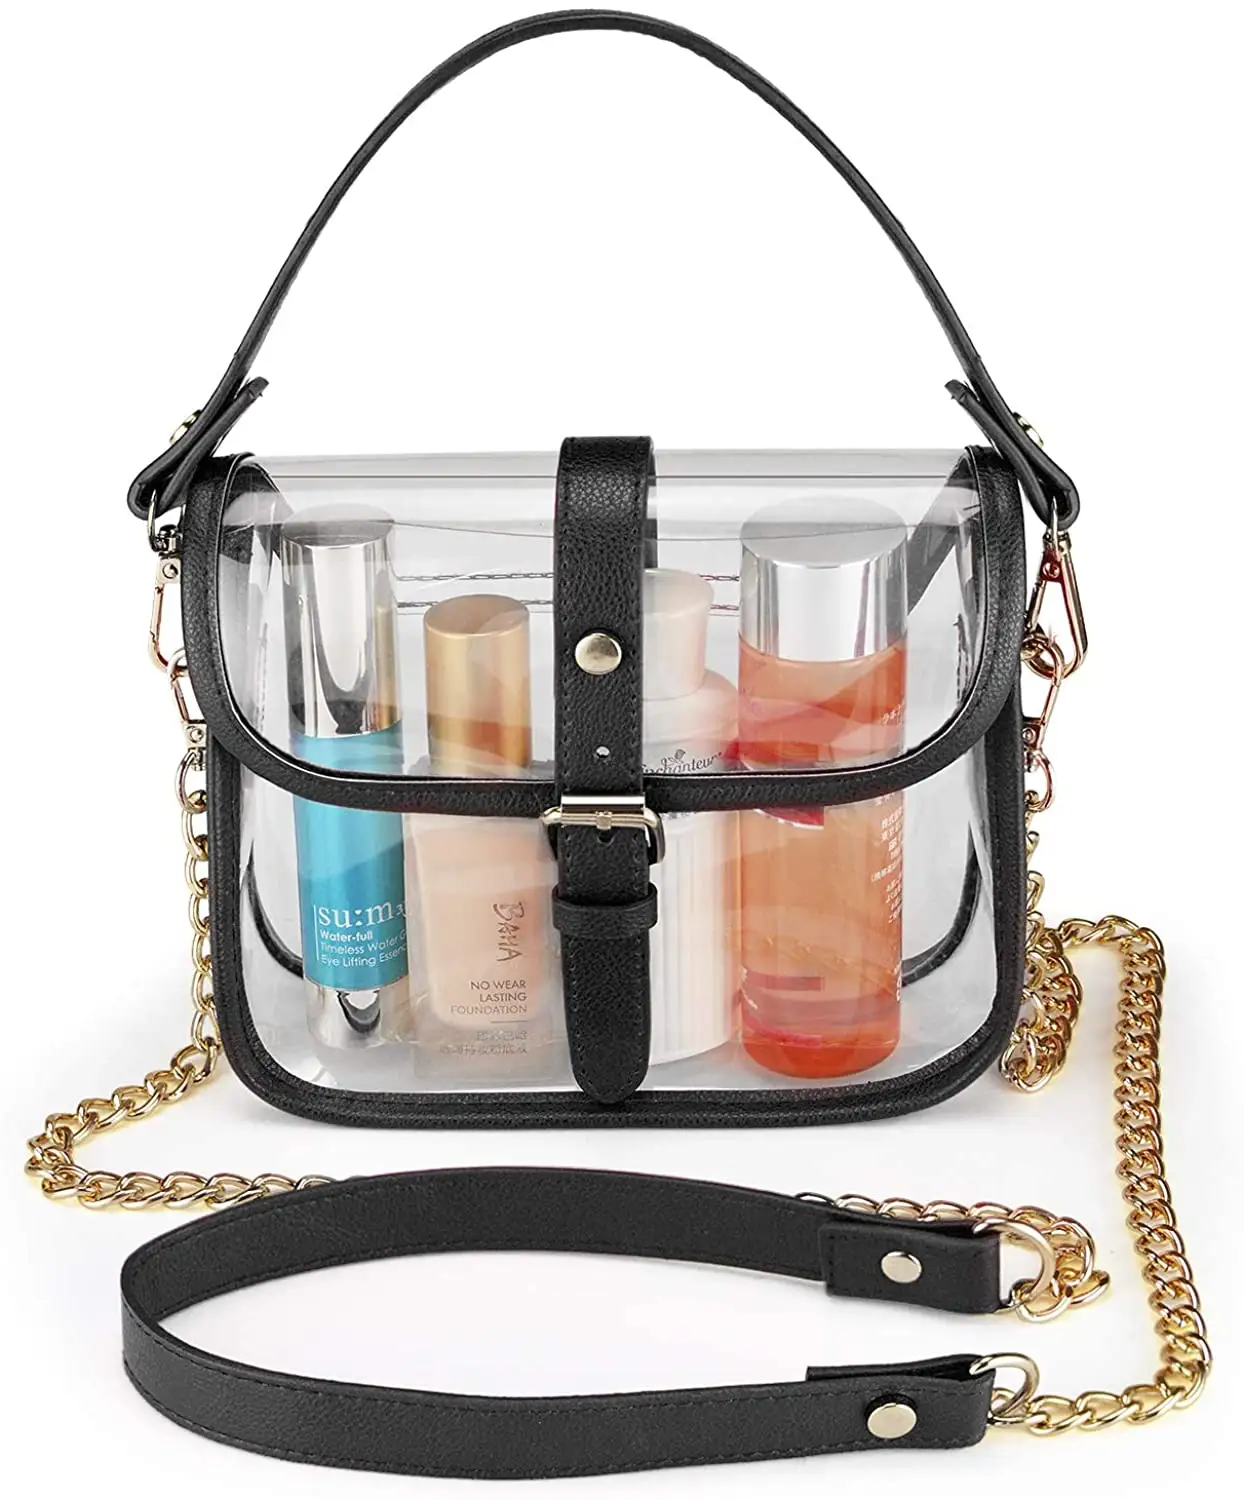 Clear Shoulder Bag Strap Crossbody Handbag Clear Purse with Leather for Women Stadium Approved